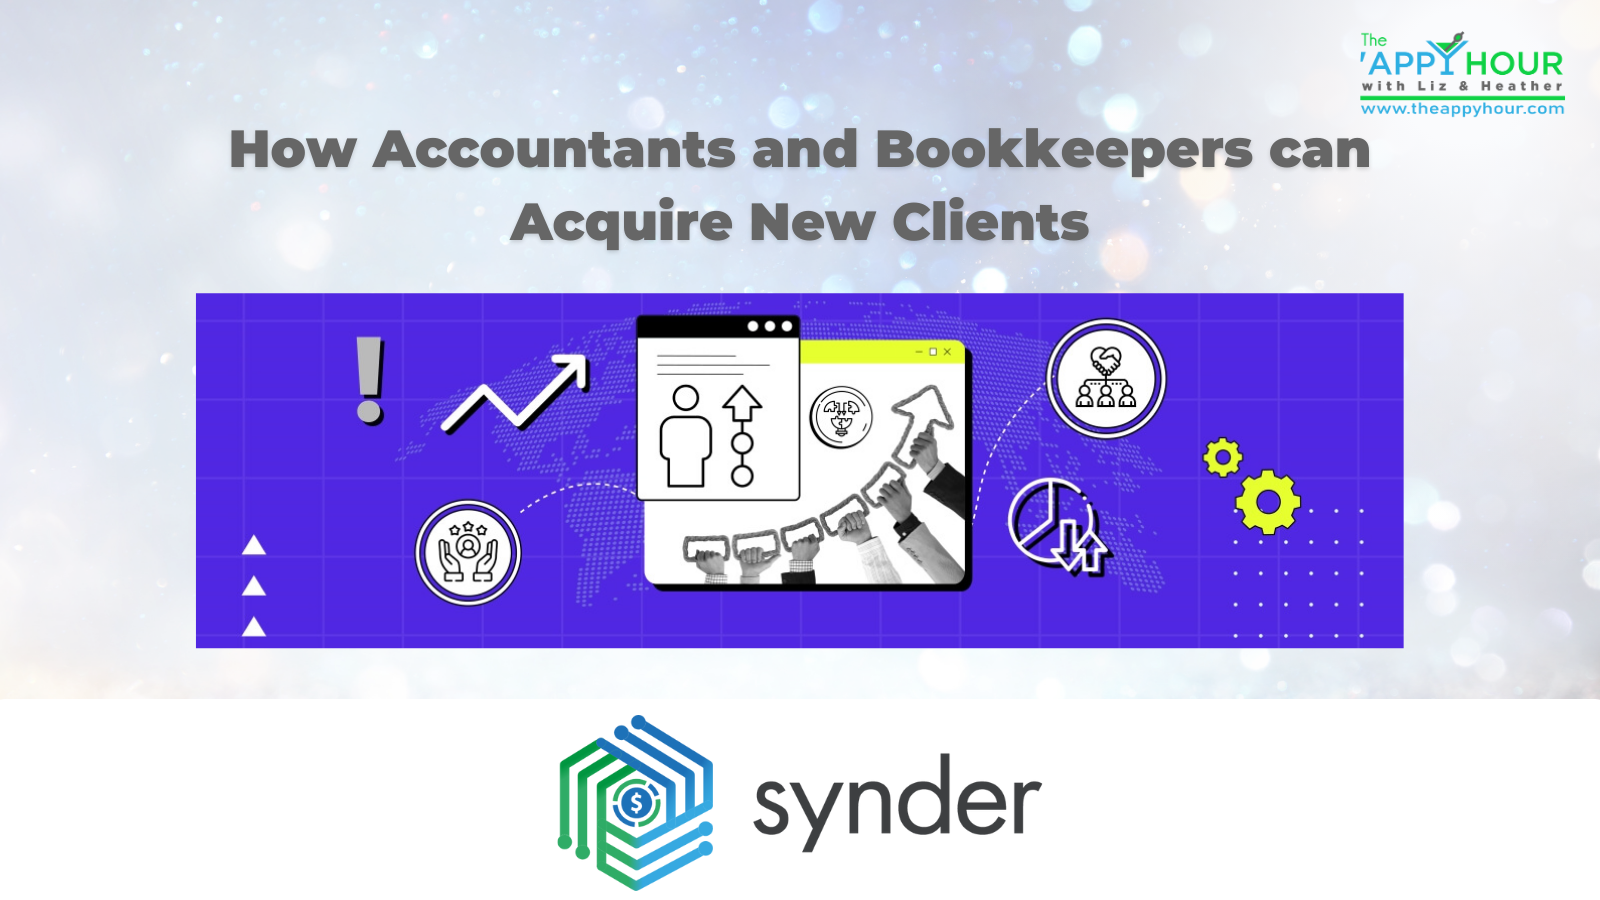 How Accountants and Bookkeepers can Acquire New Clients